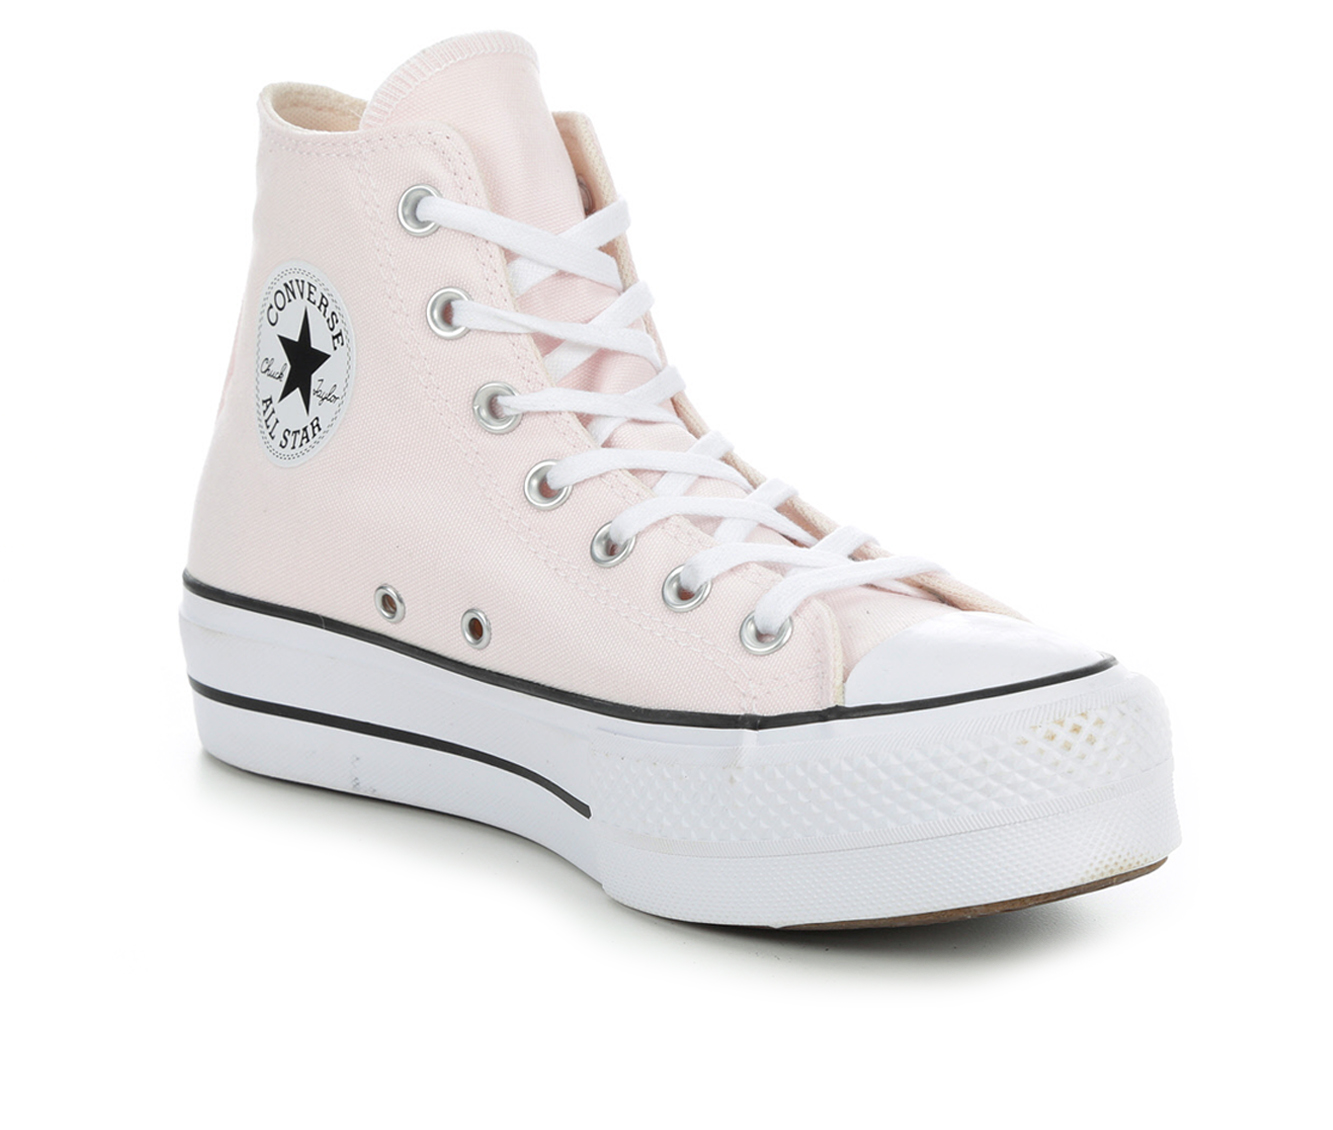 Converse Shoes & Sneakers | Shoe Carnival